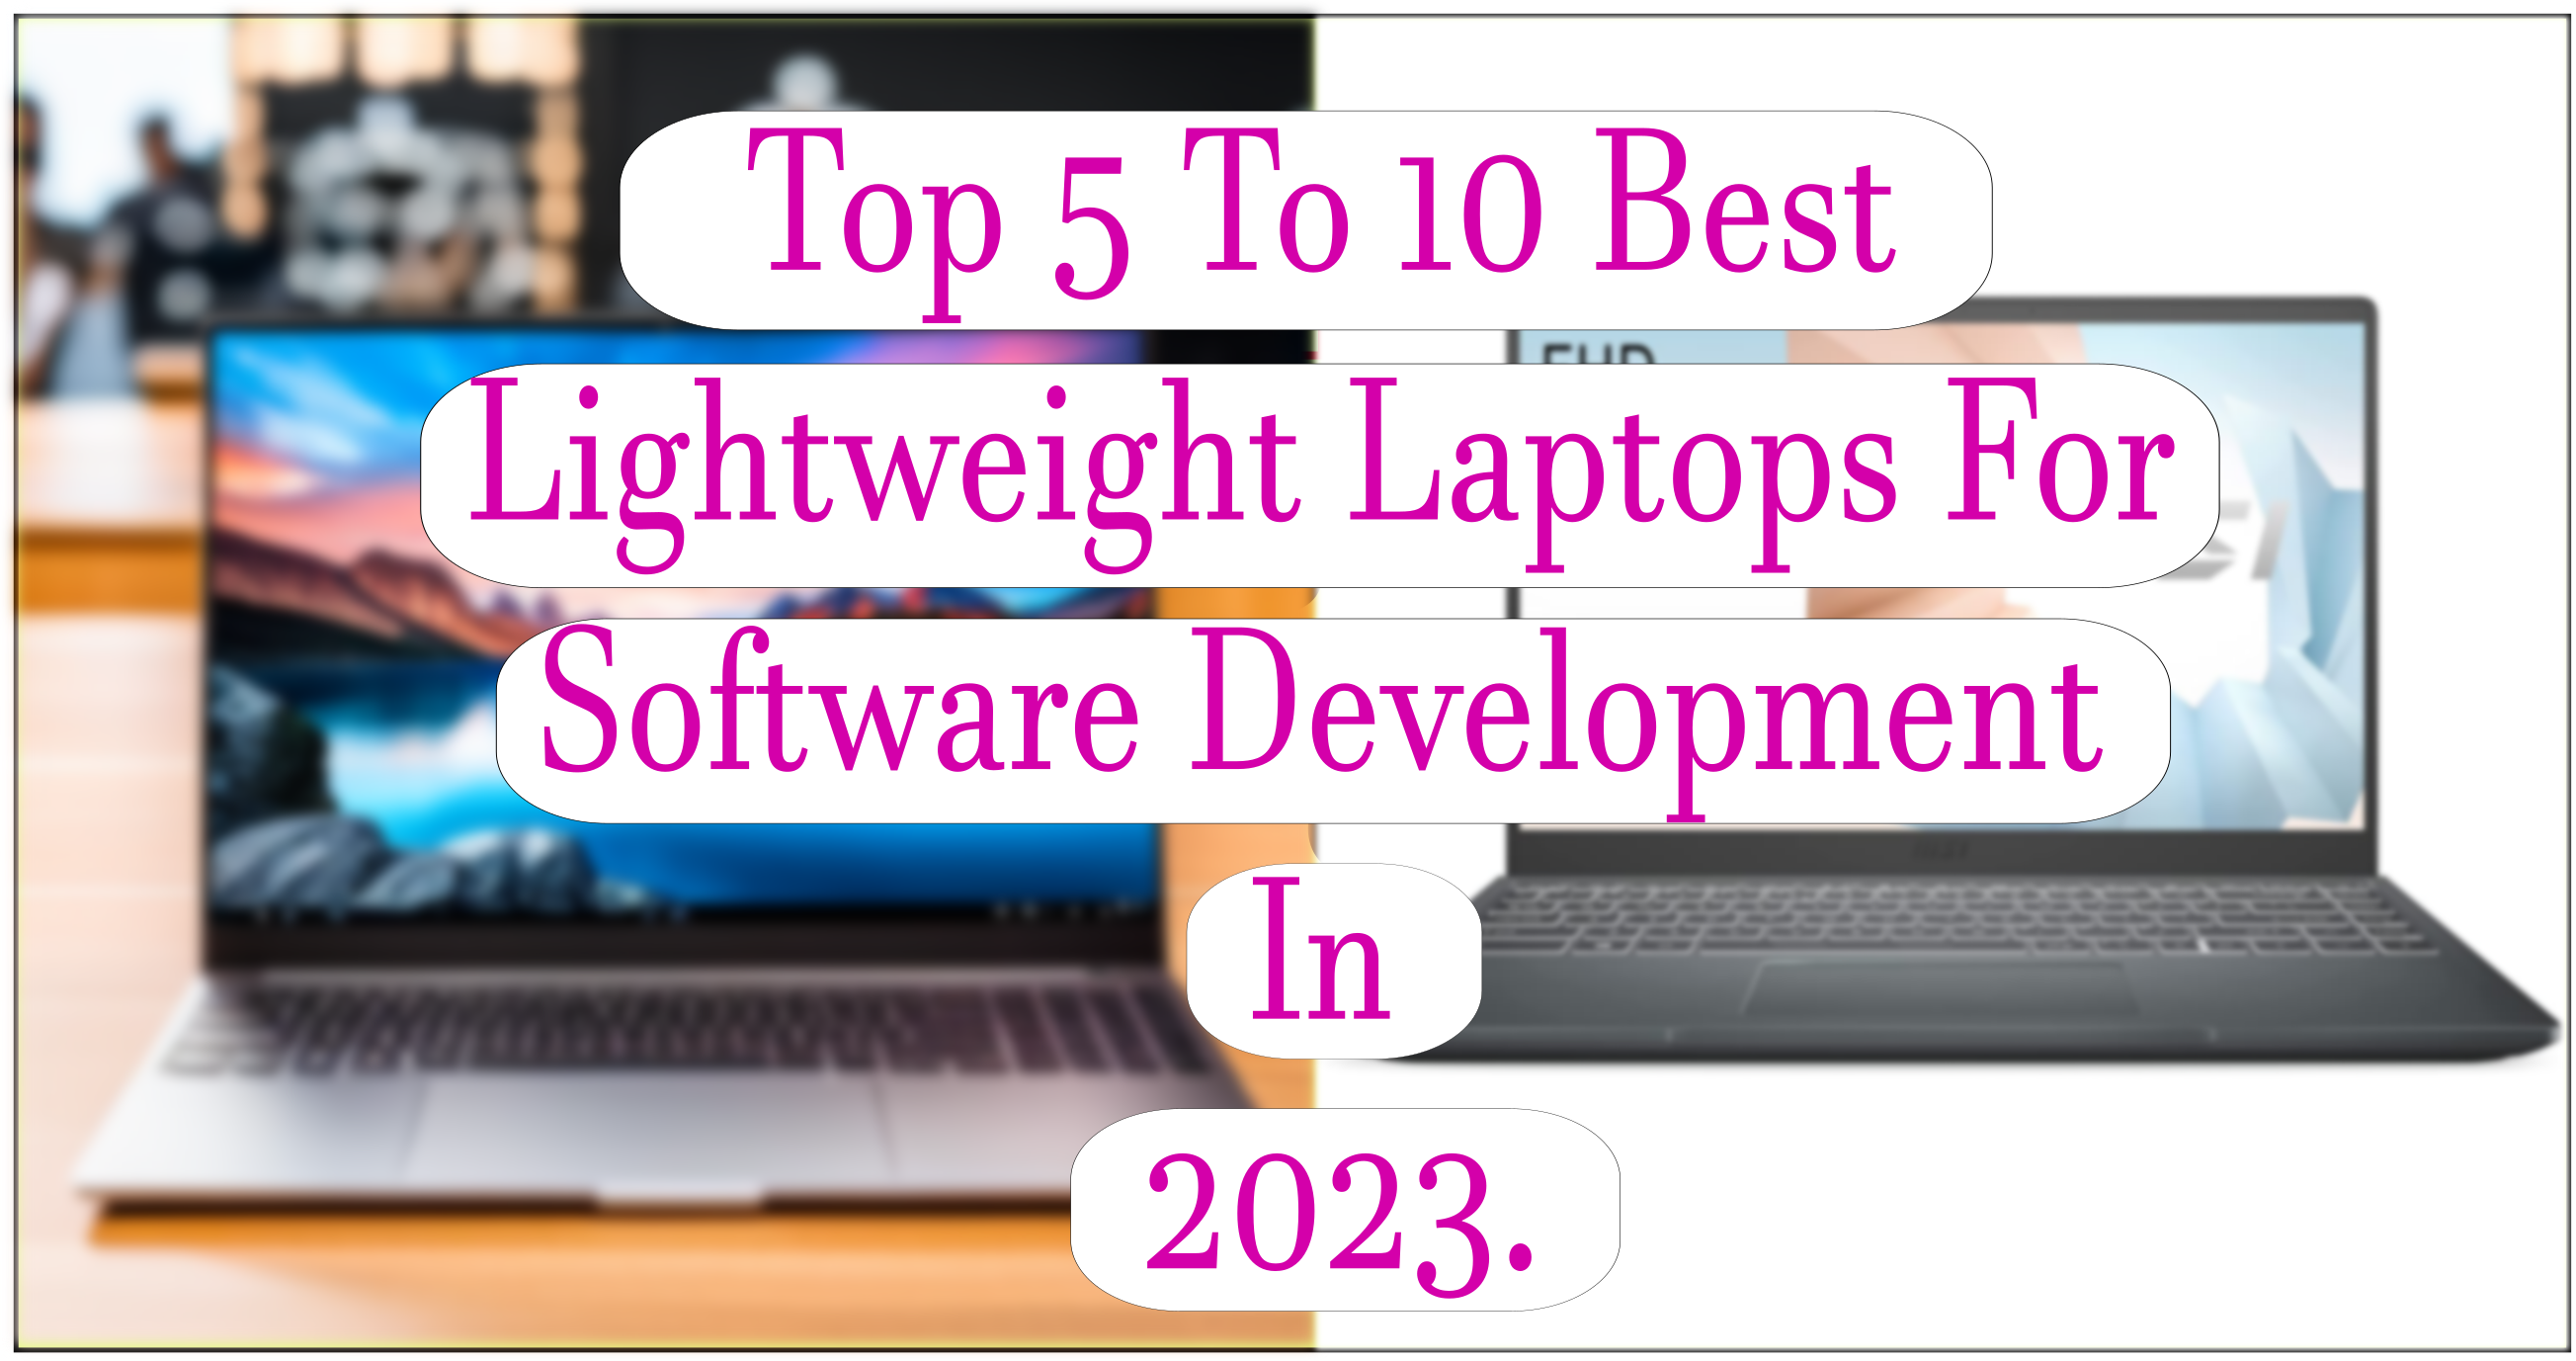 Top 5 To 10 Best Lightweight Laptops For Software Development In 2023.